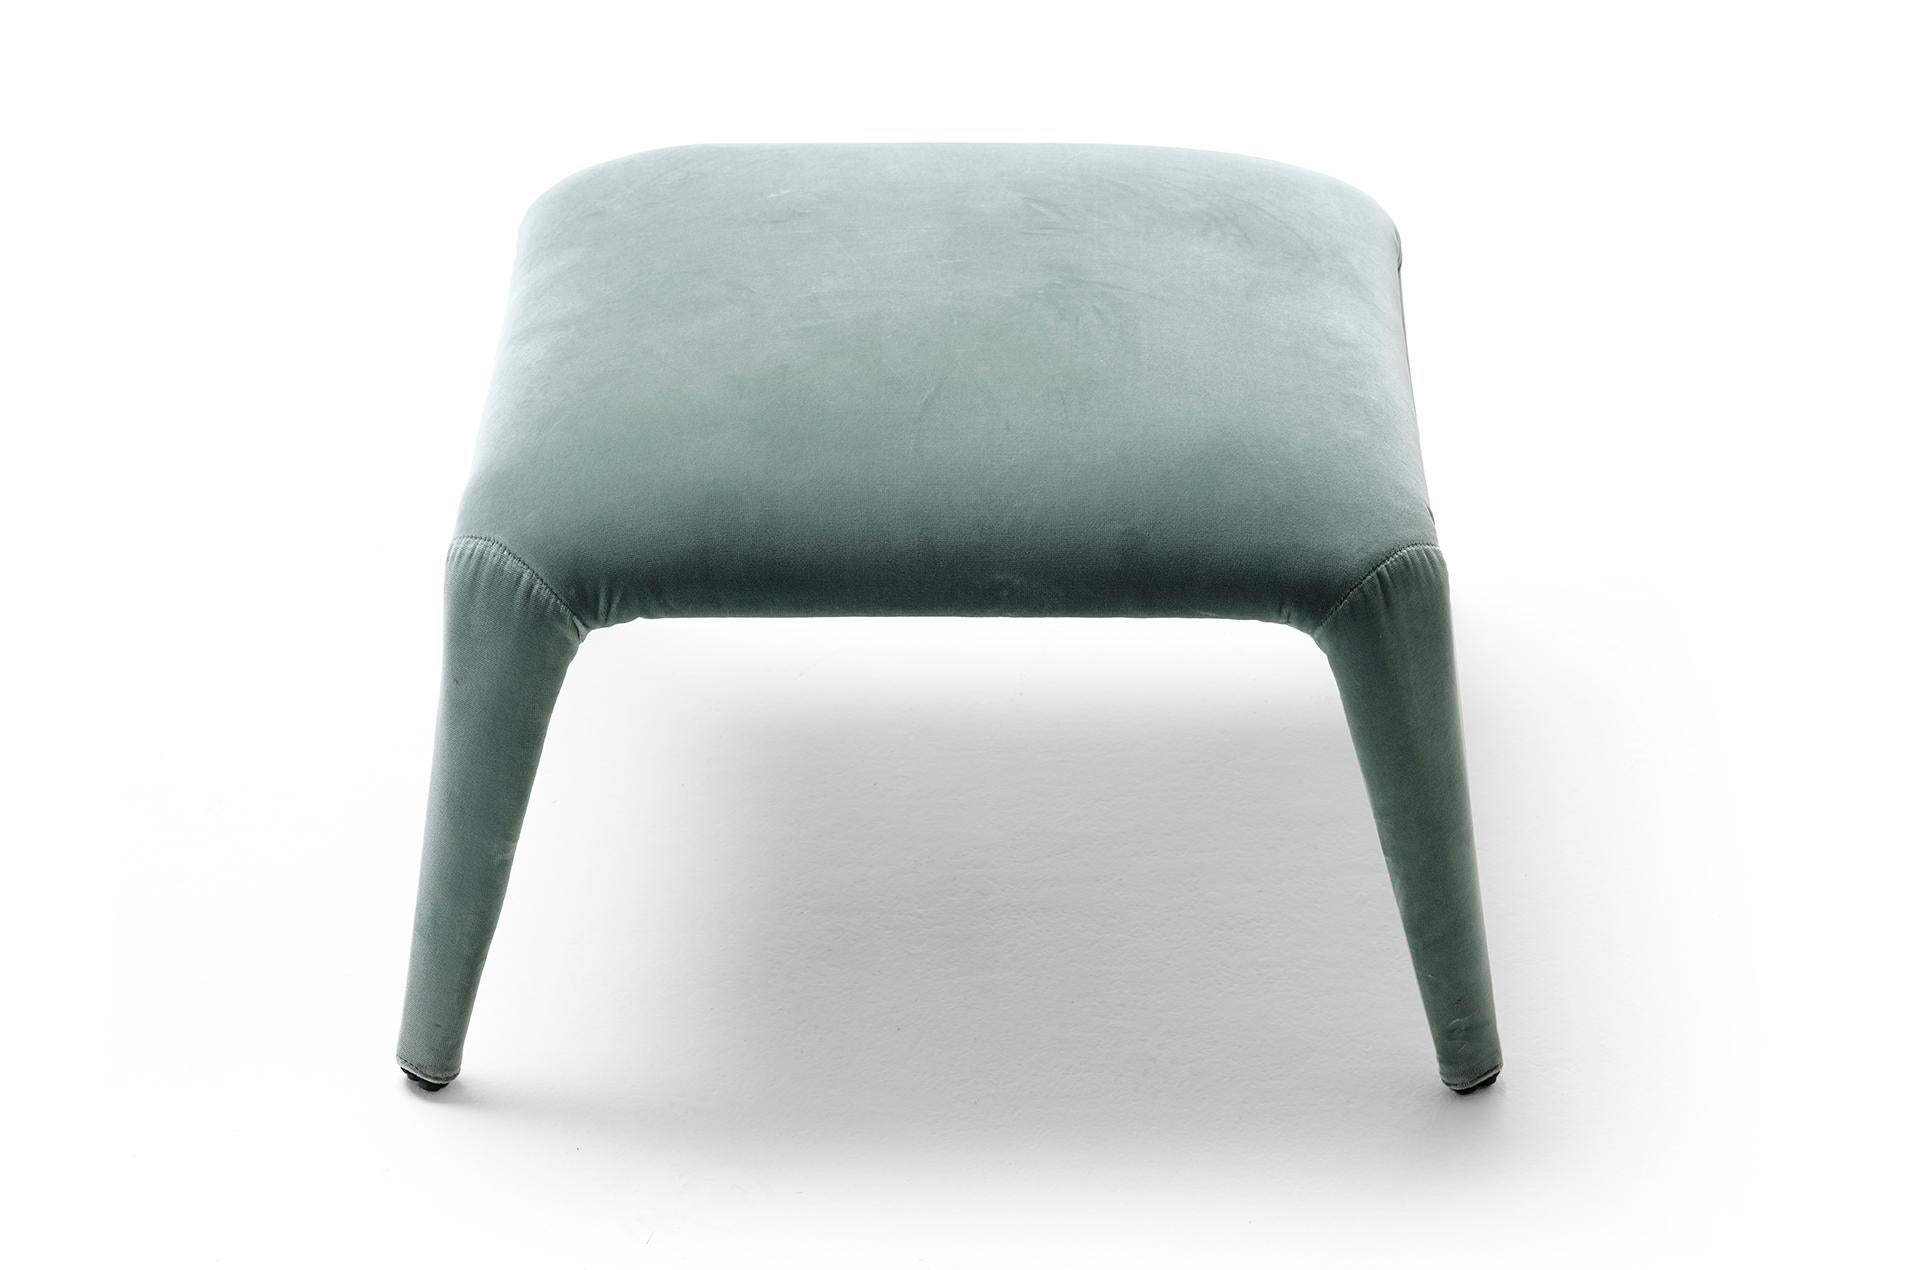 The Nova pouf is made to go with our homonymous lounge chair. It is a light-weight textile ottoman with a precious look and a fully removable fabric cover. The internal structure is a minimal metal tube skeleton that supports the elastic straps and